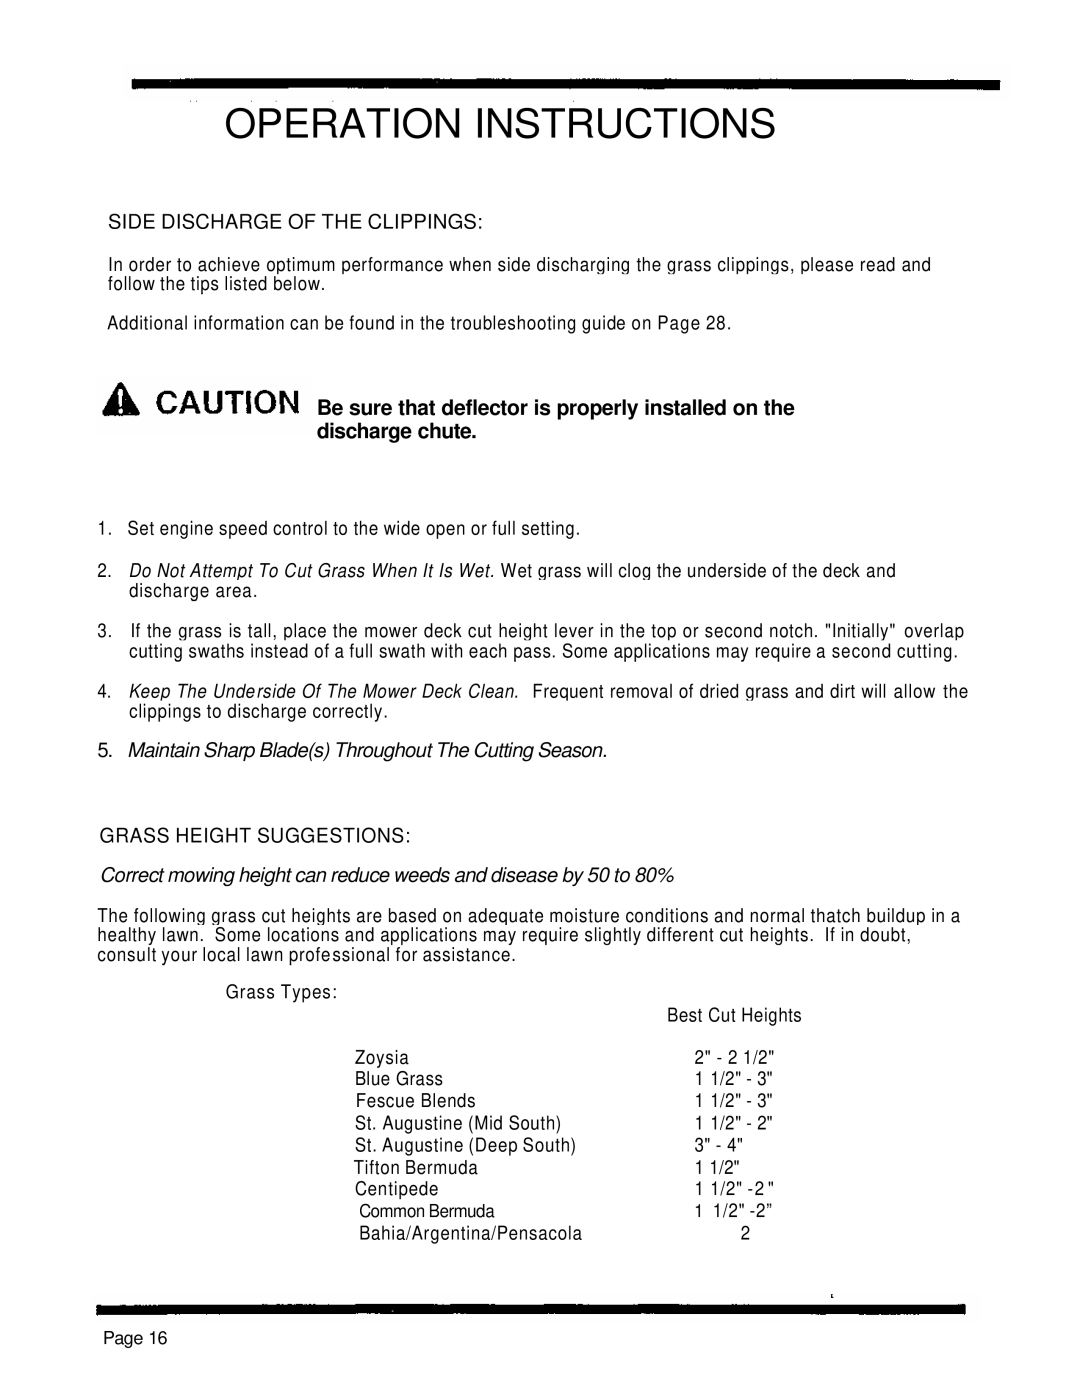 Dixon 4000 Series manual Operation Instructions, Side Discharge Of The Clippings, Grass Height Suggestions 